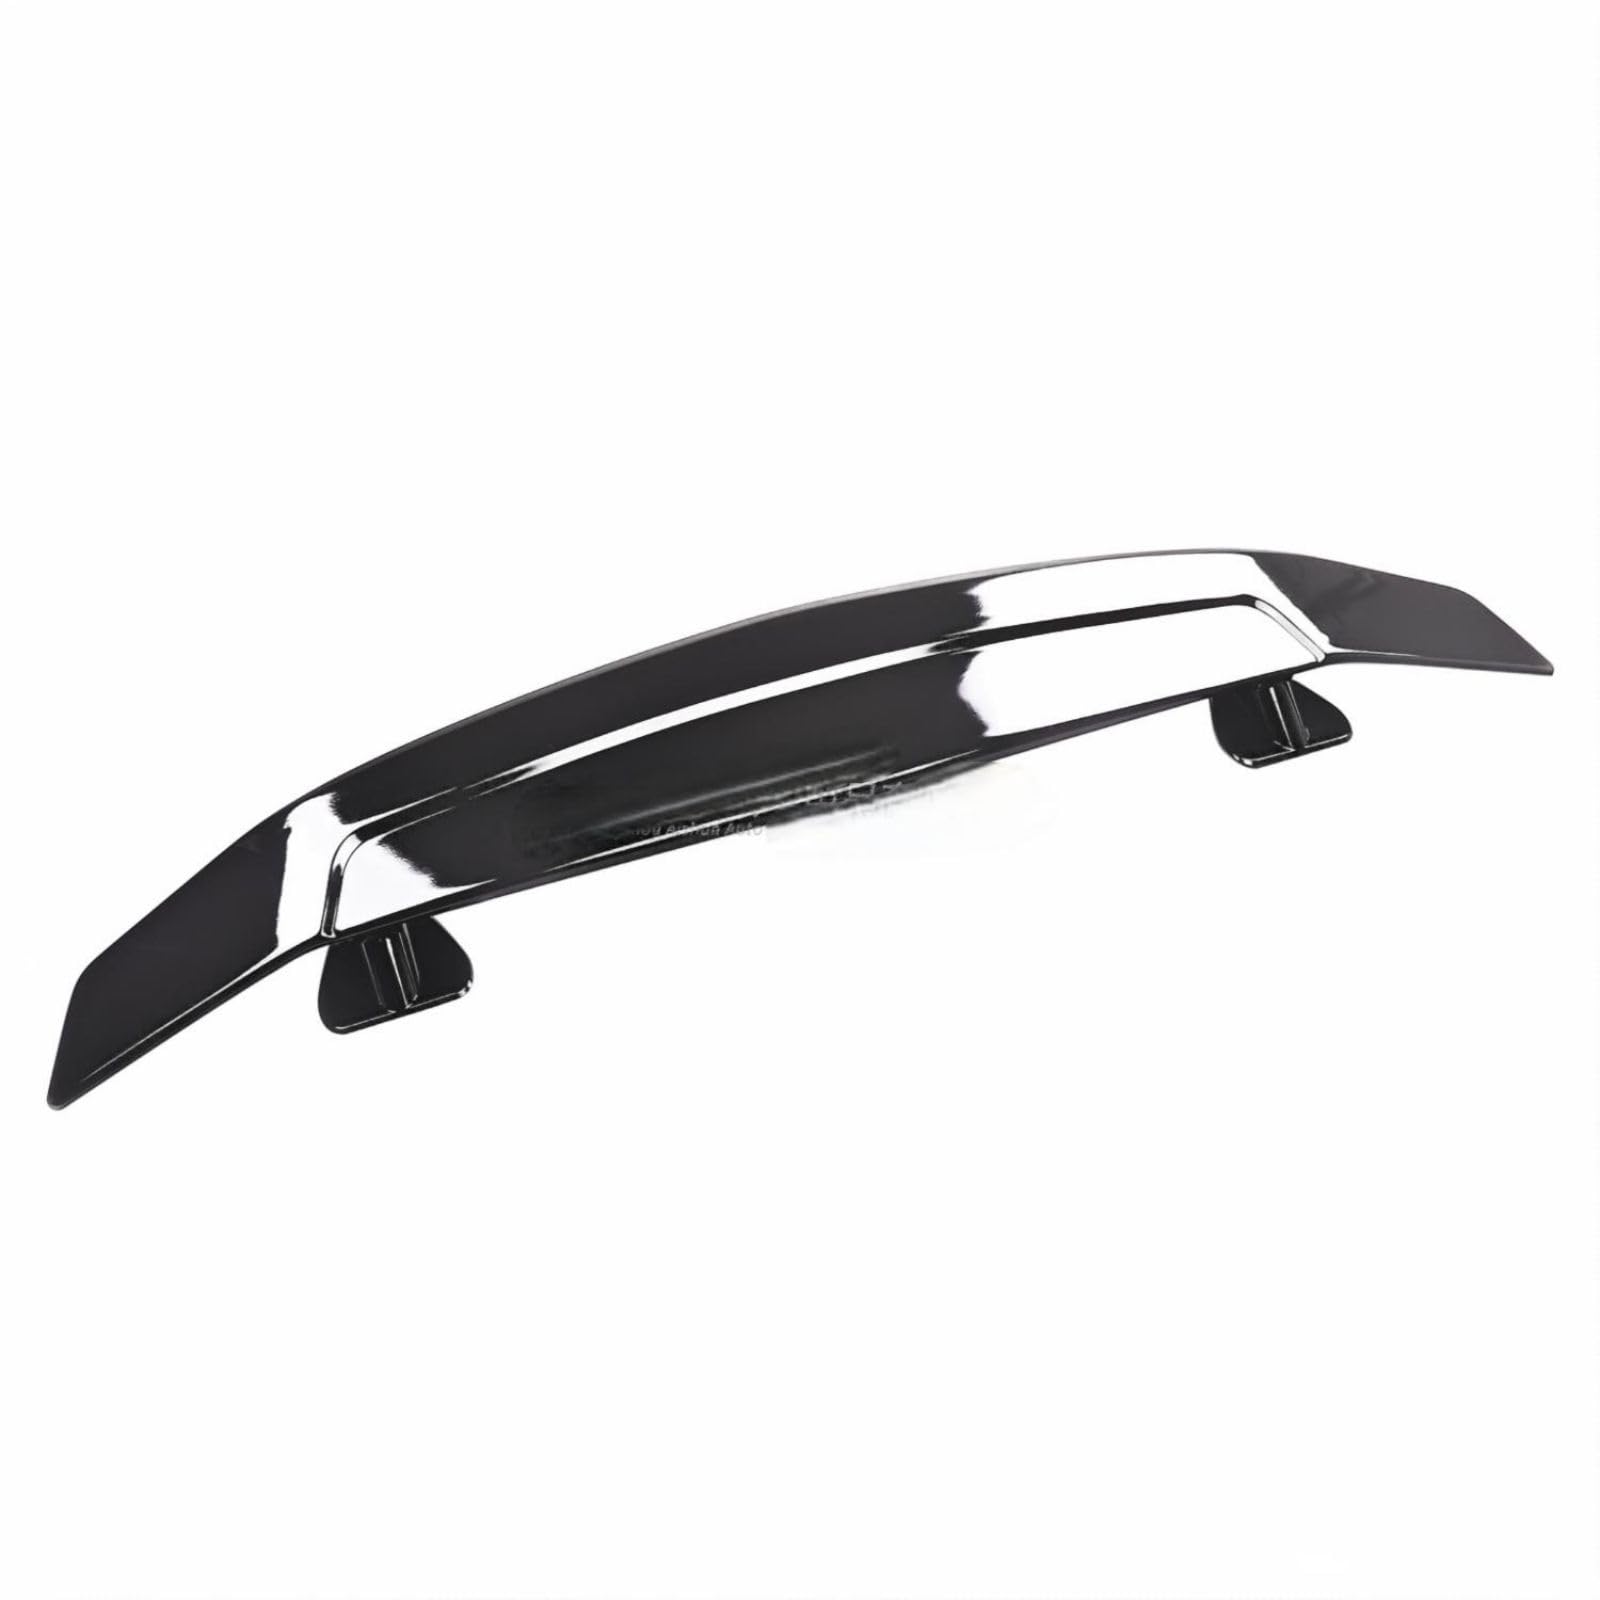 Car Rear Spoiler für Audi A5 Coupe (8T3) 2007-2011, Rear Wing Scratch-Resistant Boot Rear Spoiler Wings Lip Car Styling Accessories,Bright Black von EESWCSZZ3